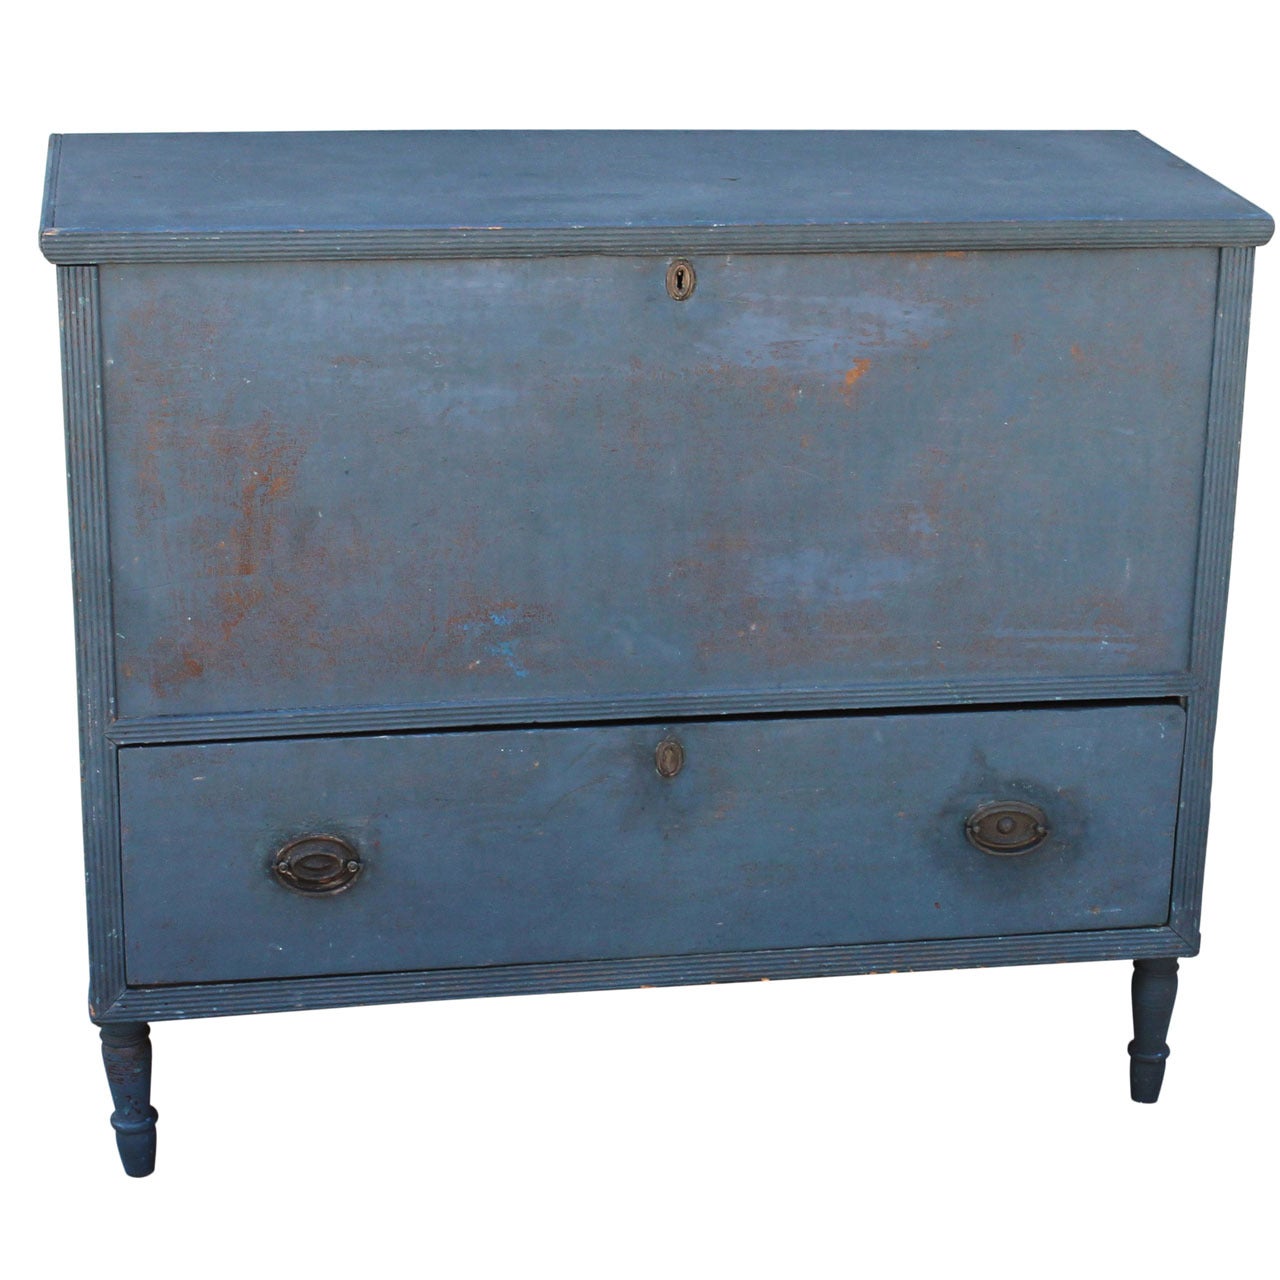 19th Century New England Original Blue Painted Tall Blanket Chest